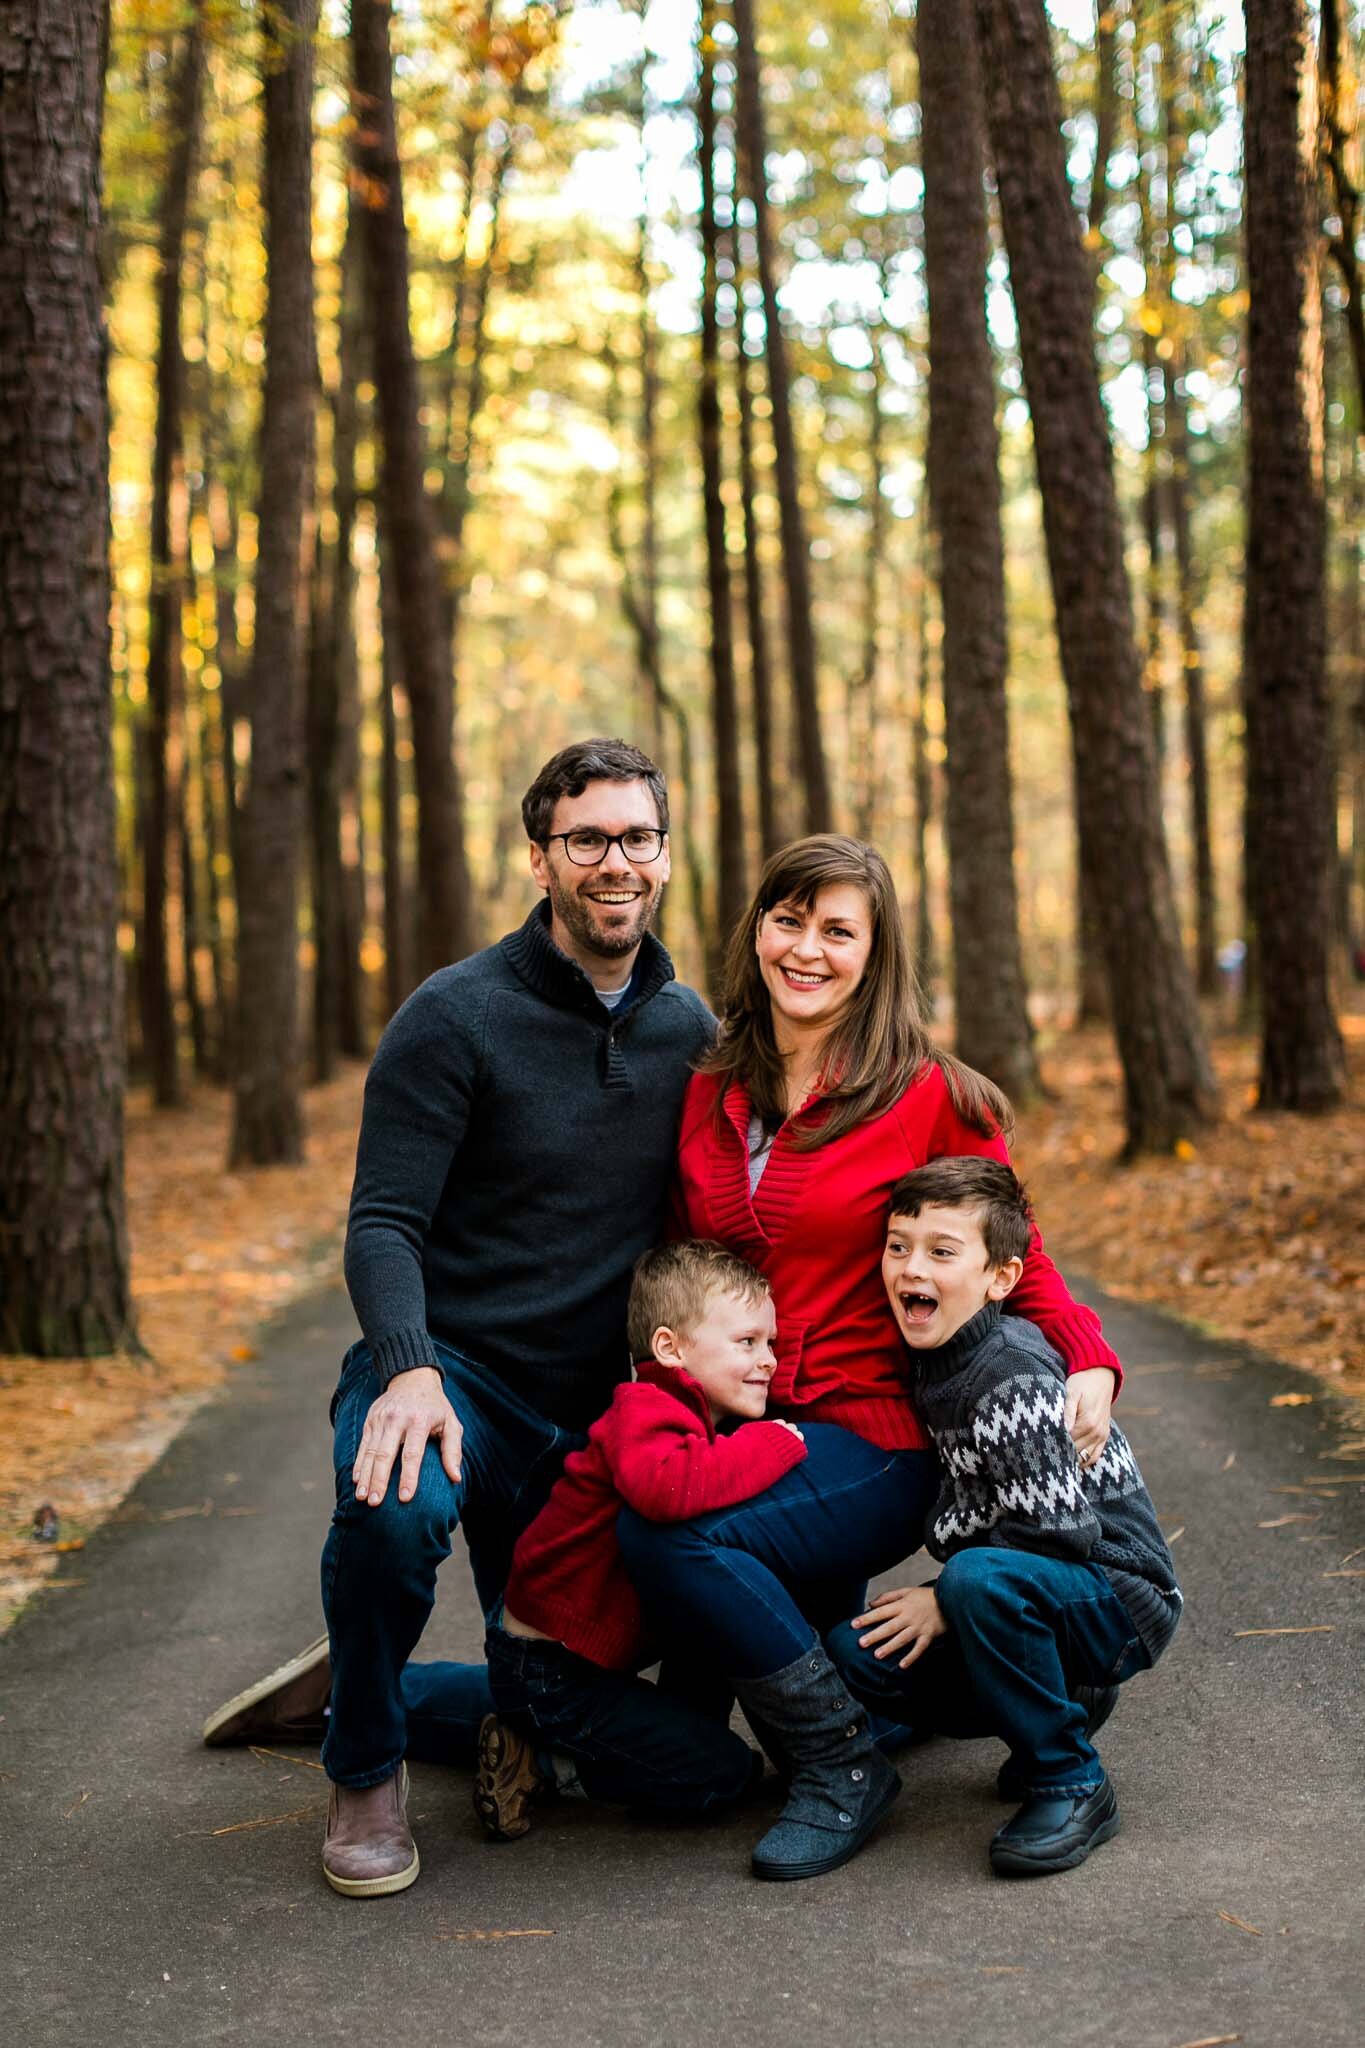 Raleigh Family Photographer | By G. Lin Photography | Candid family photo outdoors at Umstead Park